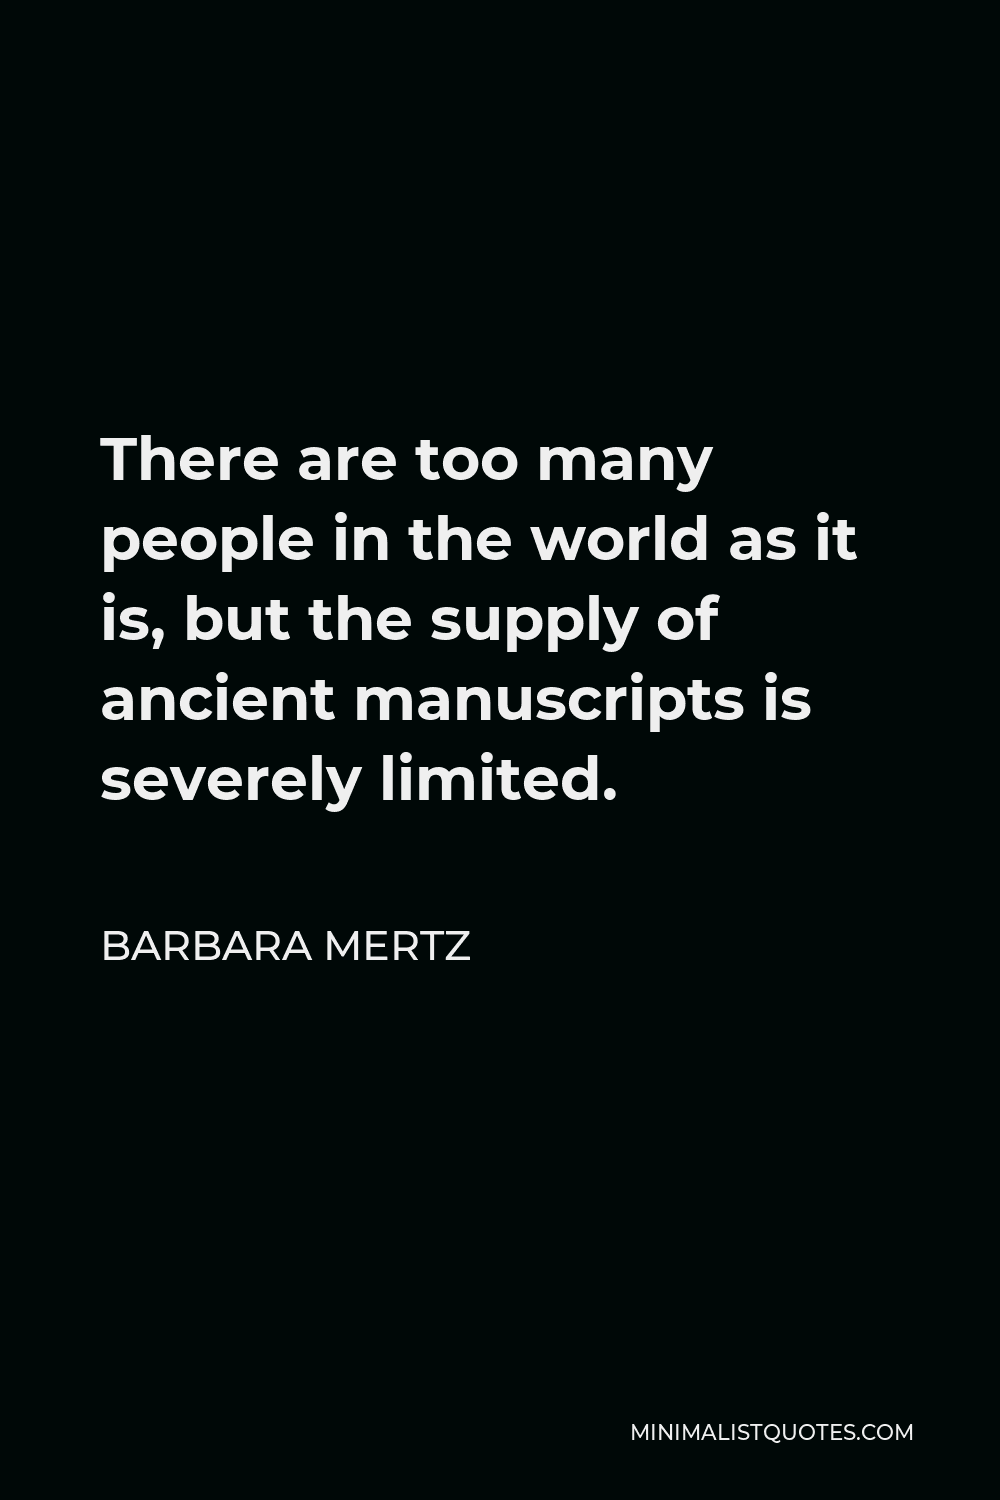 Barbara Mertz Quote - There are too many people in the world as it is, but the supply of ancient manuscripts is severely limited.